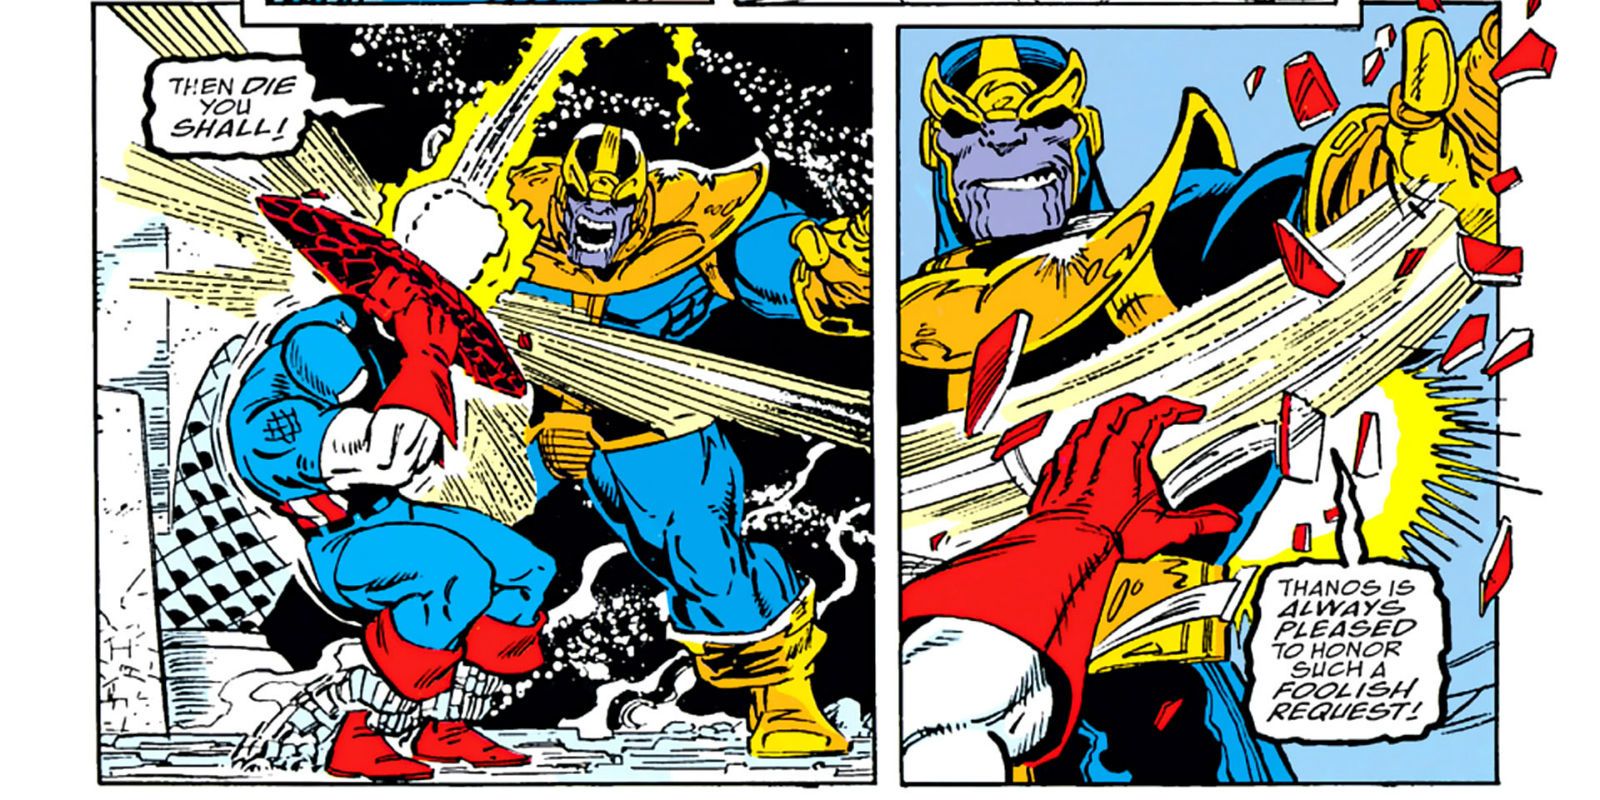 Thanos destroys Captain America's shield in The Infinity Gauntlet comics.